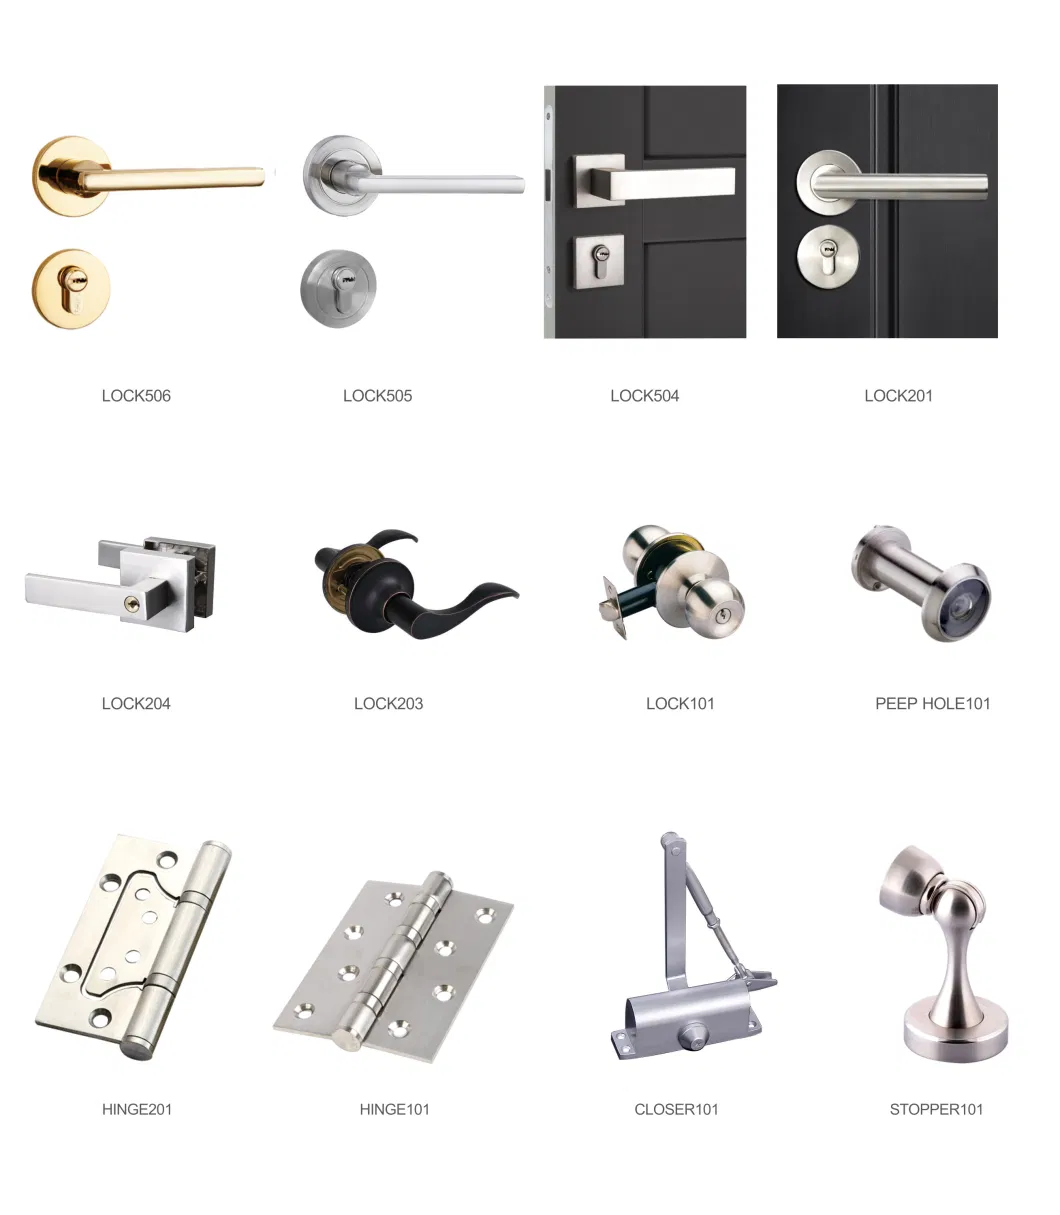 Best-Selling Domestic Security Doors and Foreign Advanced Steel Fire Rated Door